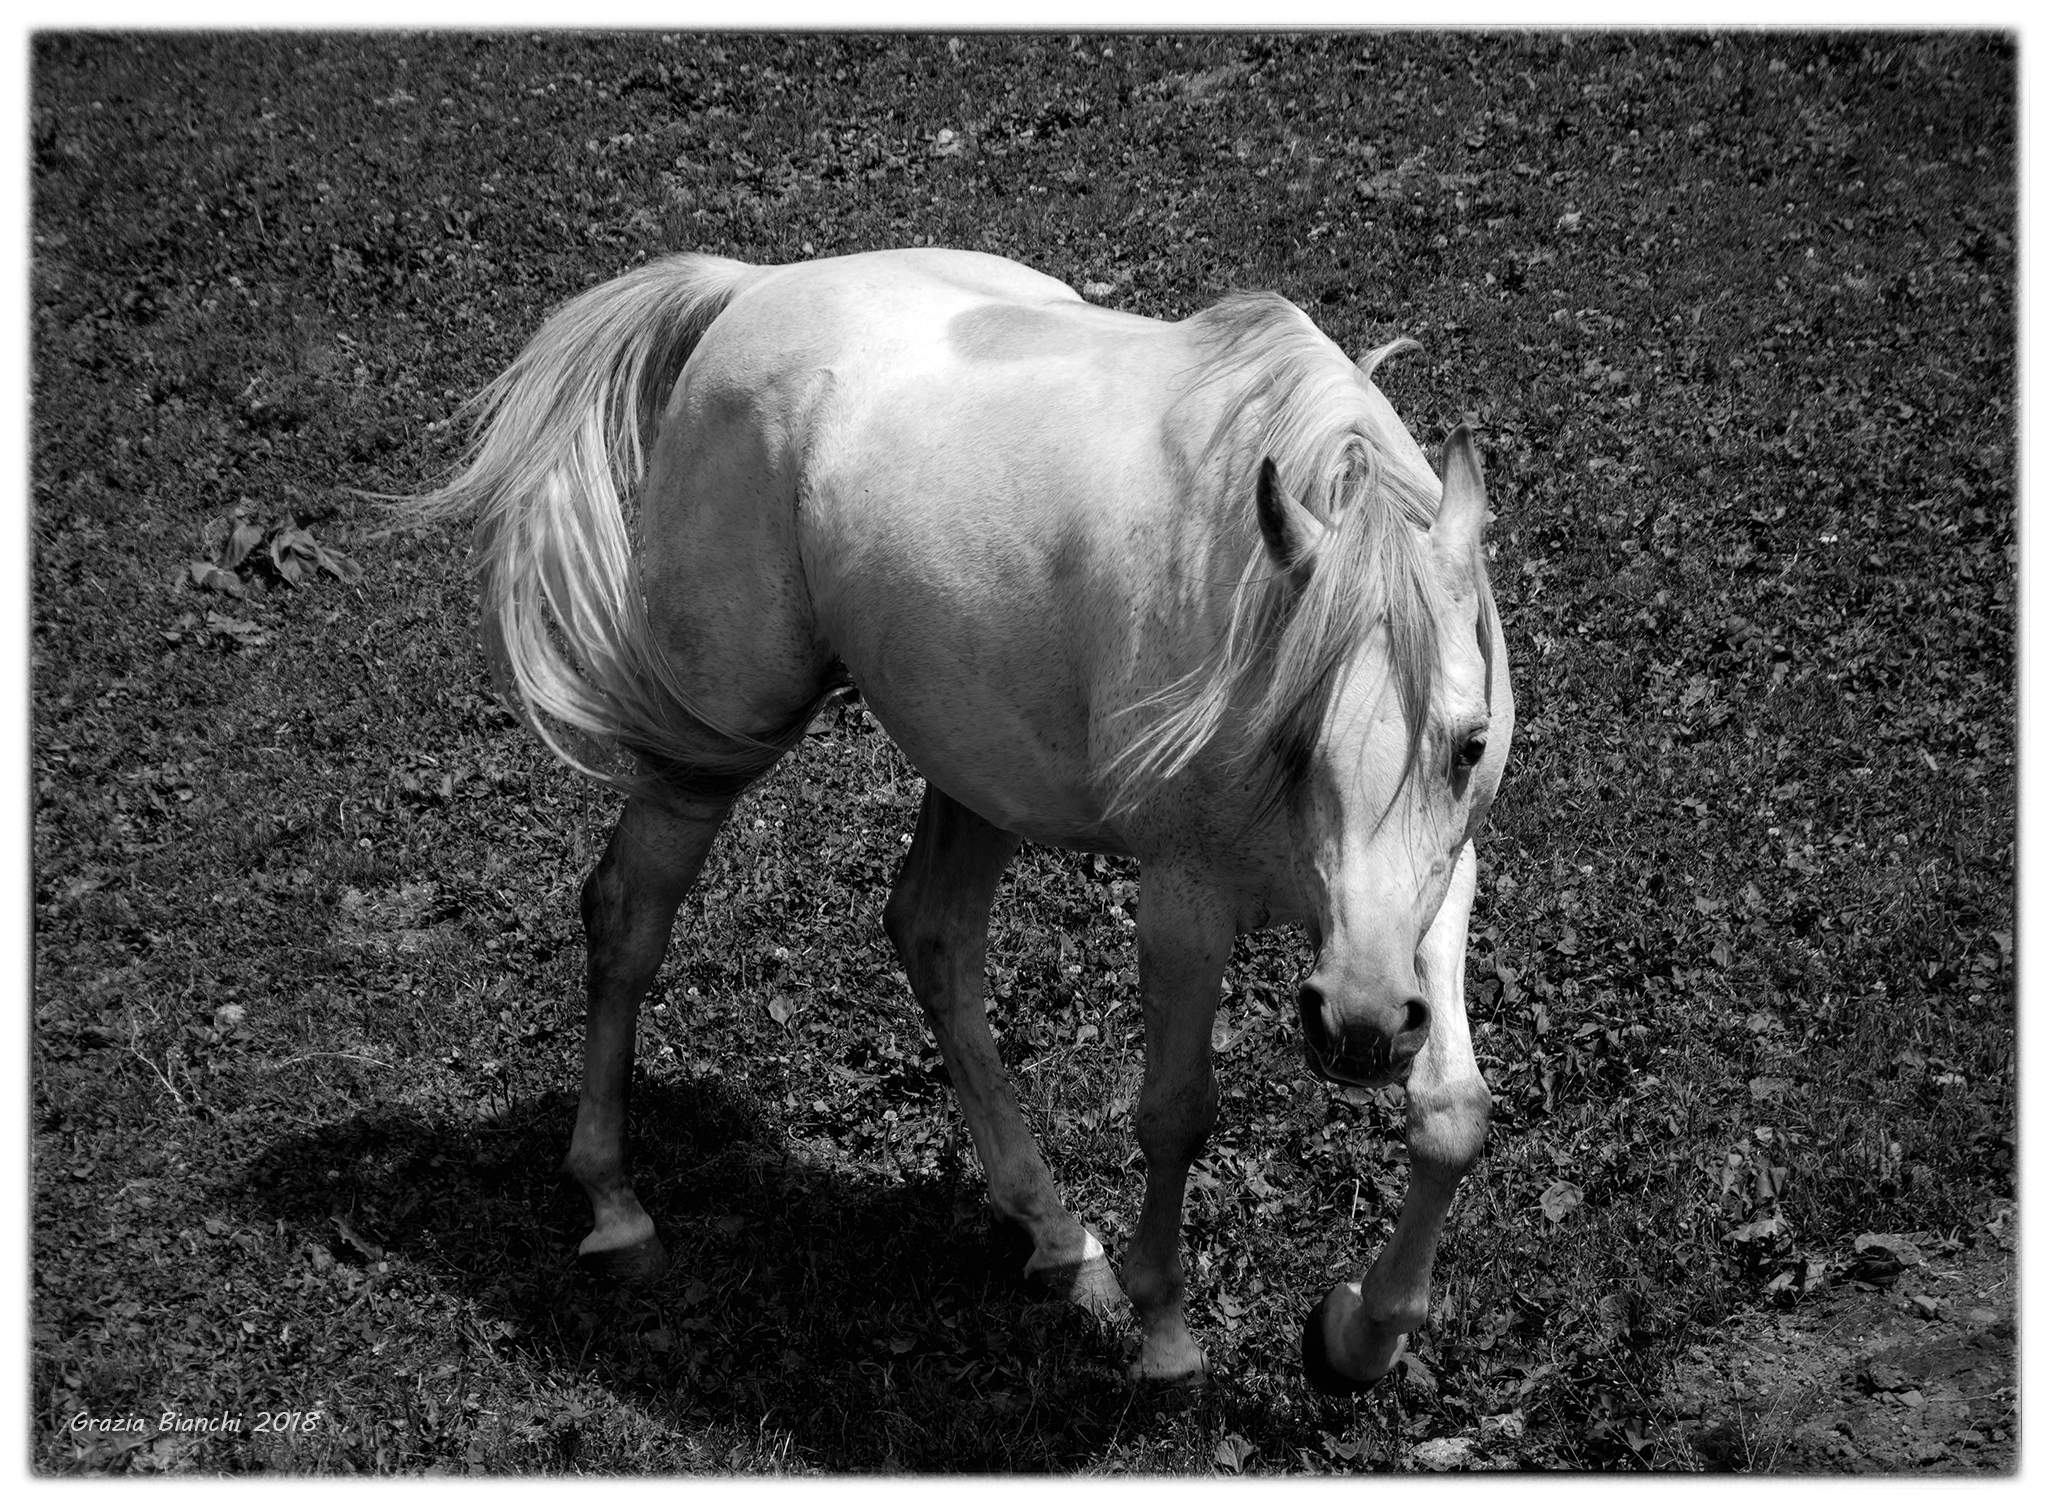 Horse at revers Val d'aosta...